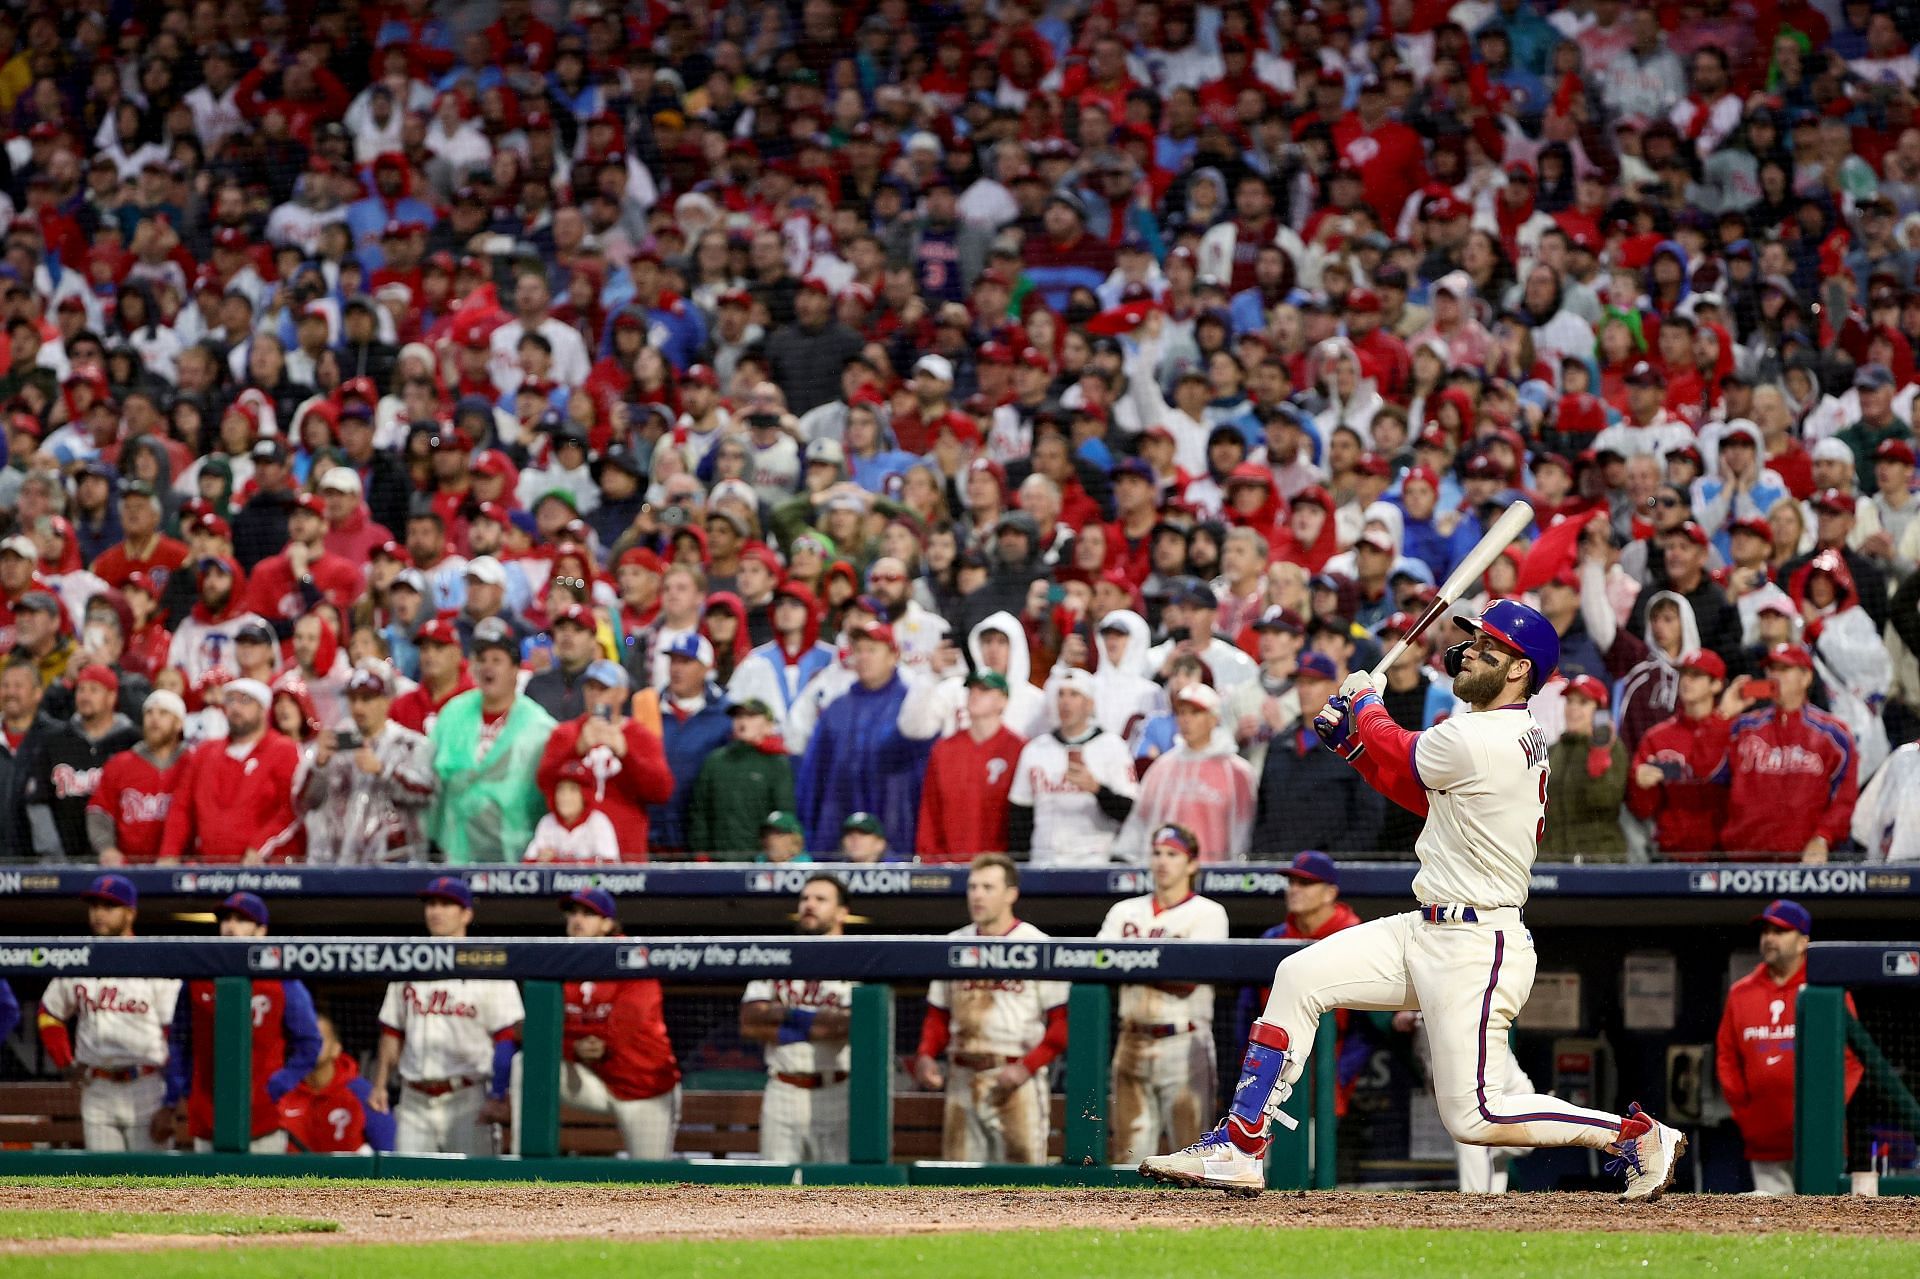 Philadelphia Phillies fans are ecstatic as the team makes World